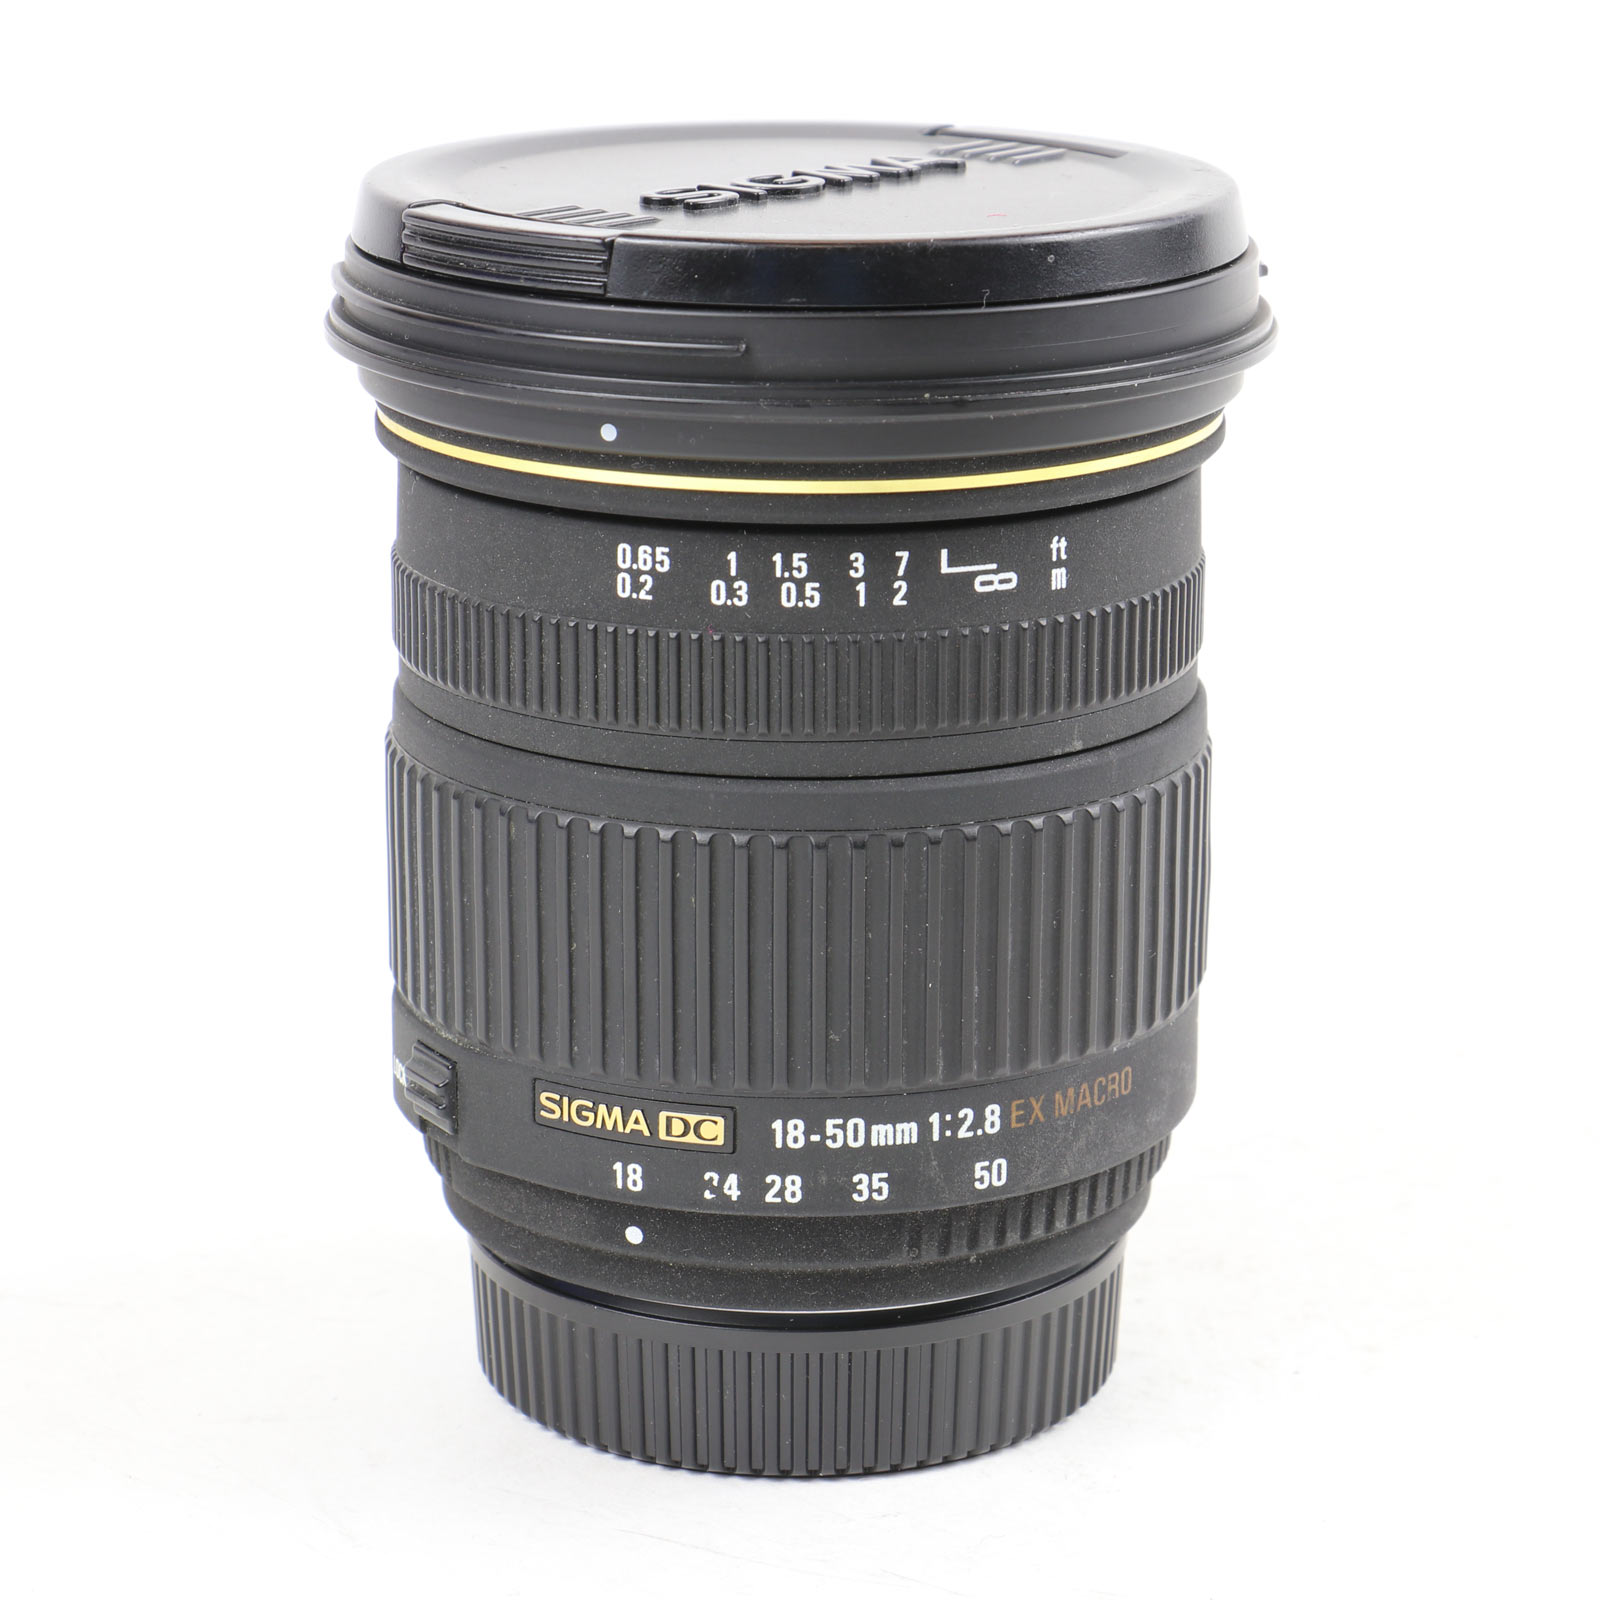 Used Sigma 18-50mm f2.8 EX DC Lens - Nikon Fit | Wex Photo Video